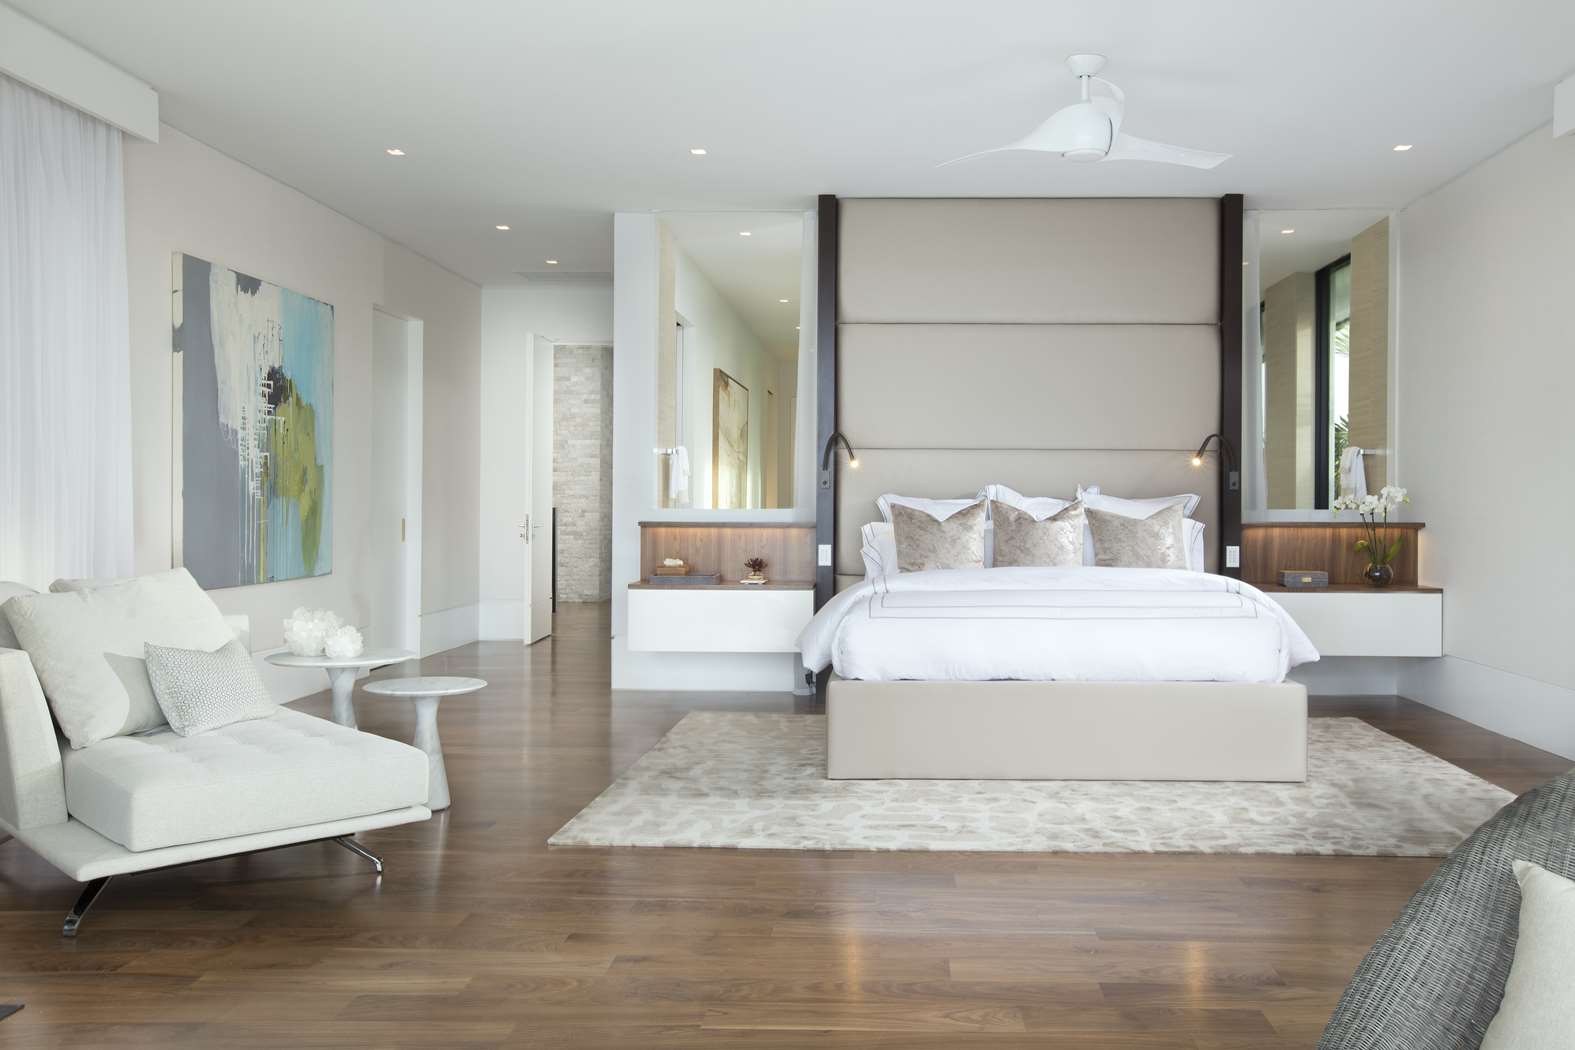 bedroom master layout waterfront contemporary bedrooms interiors elegance lauderdale dkor furniture interior ft basics guide fort project inside reveal dkorinteriors